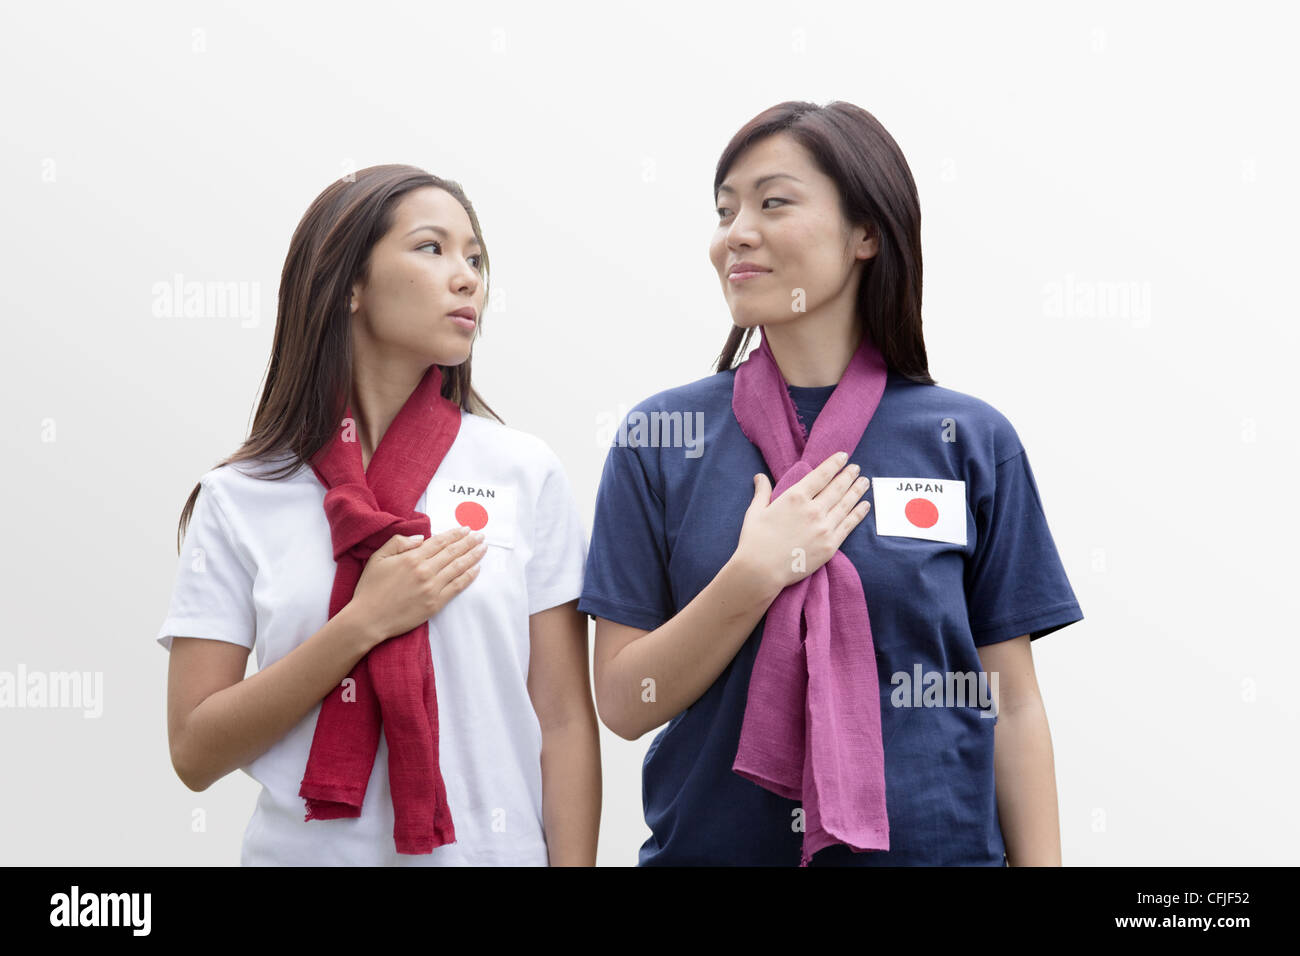 Young women supporting the Japan women's national football team Stock Photo